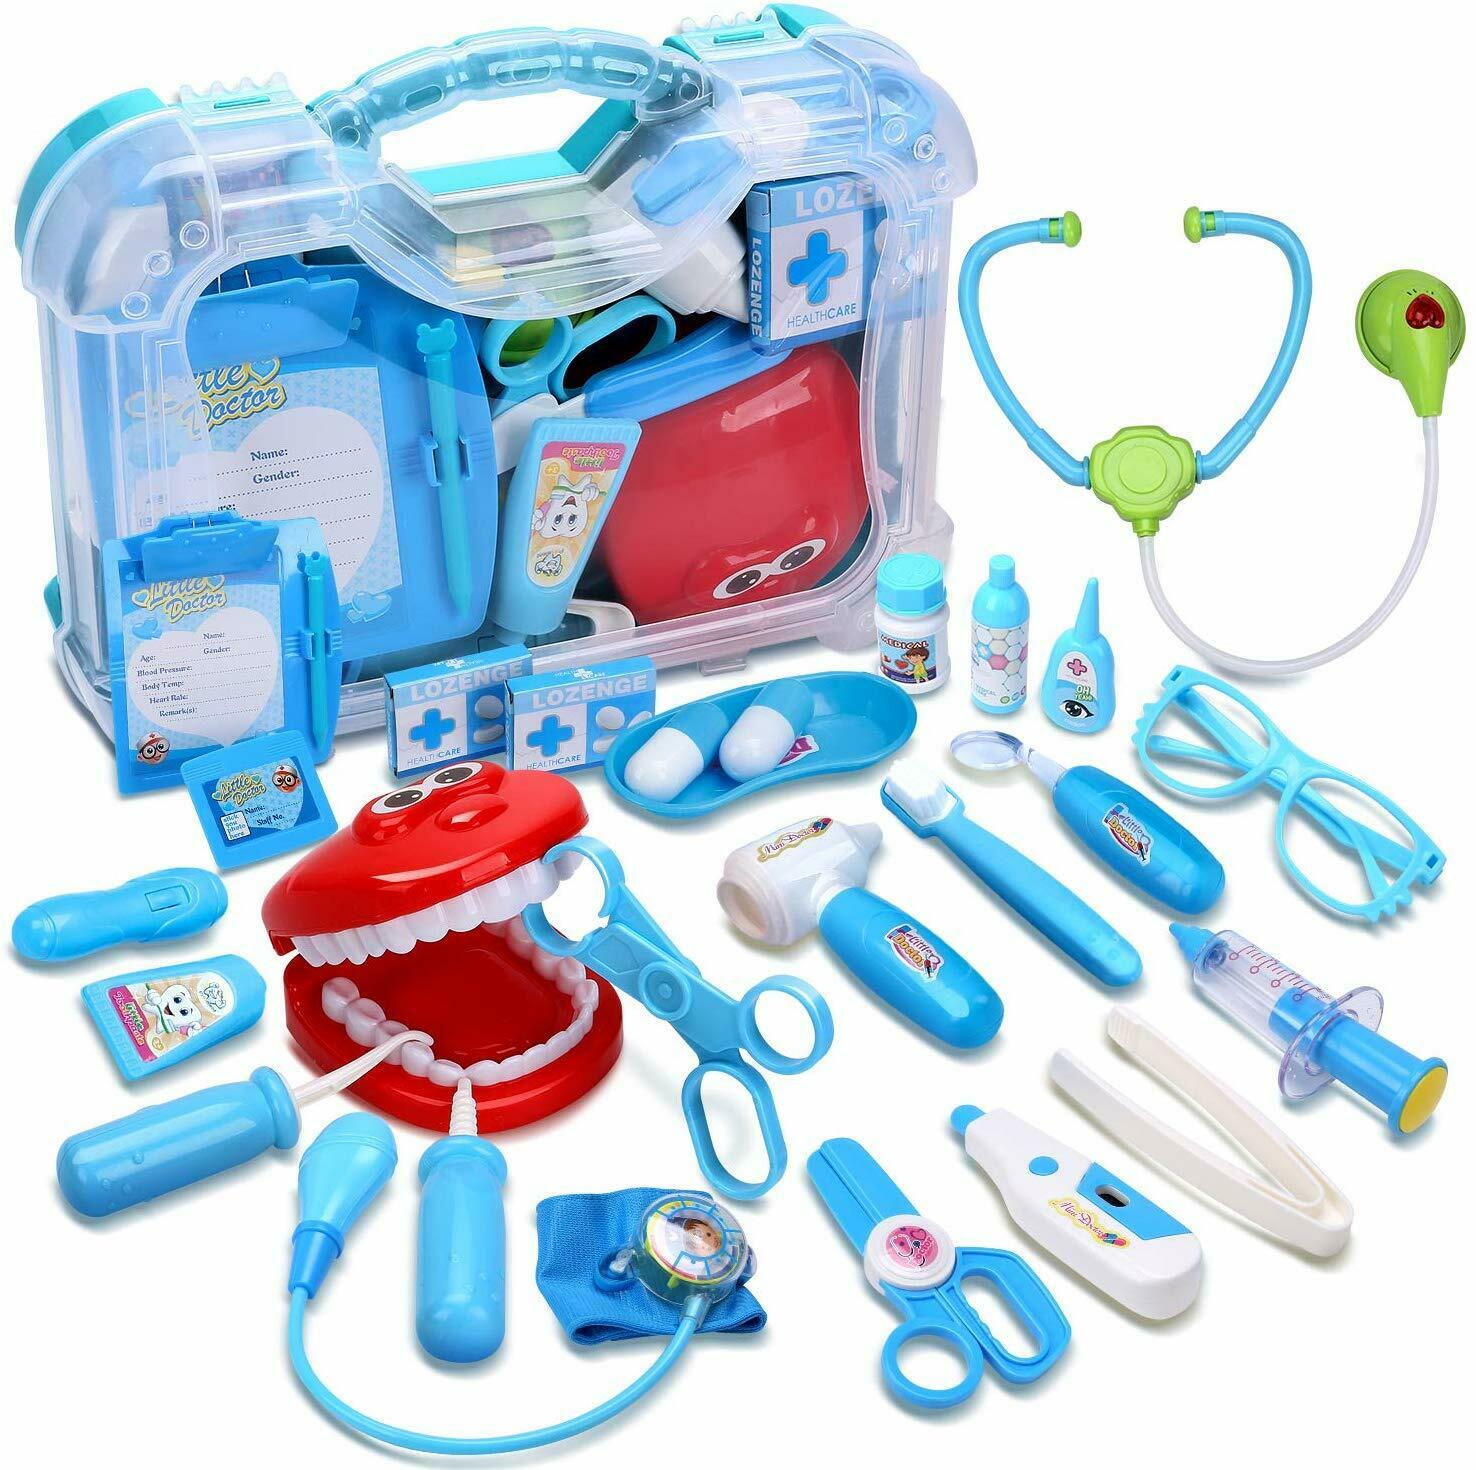 Toy Medical Kit Kids Pretend Play Dentist Doctor Kit Playset Carrying Case 30pcs